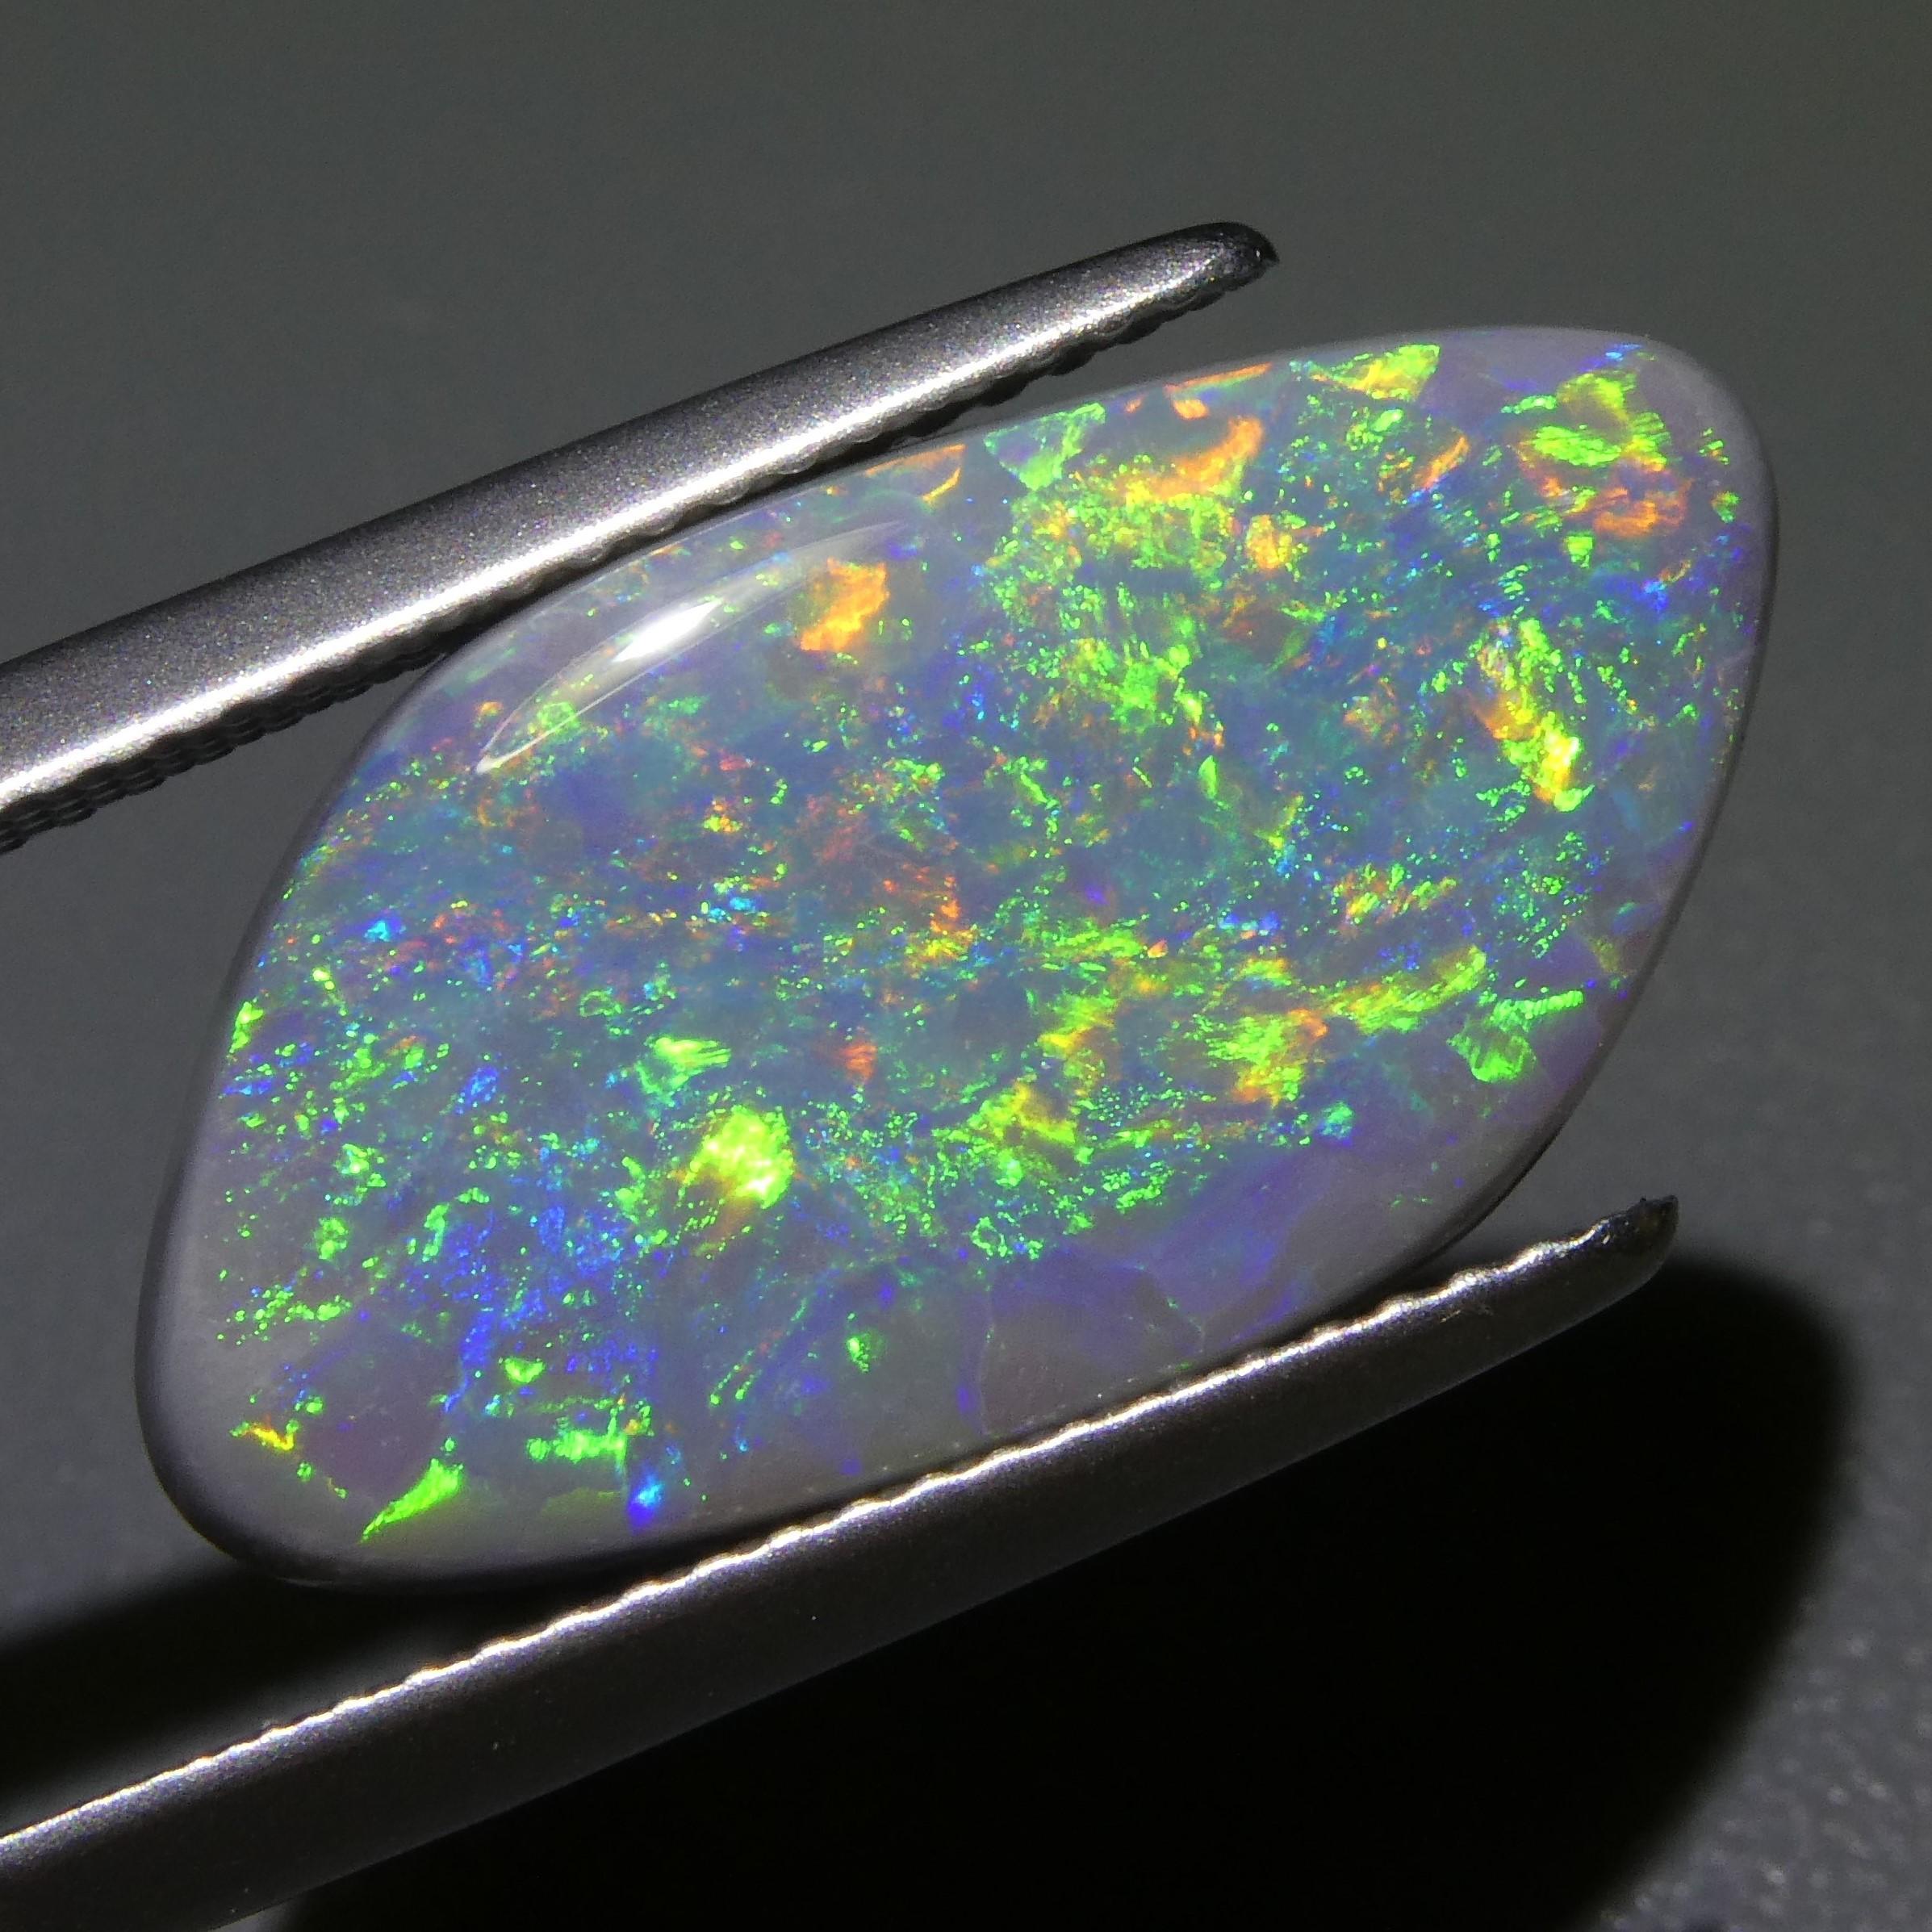 This is a stunning GIA Certified Opal 

The GIA report reads as follows:

GIA Report Number: 2211817189
Shape: Freeform Tablet
Cutting Style: 
Cutting Style: Crown: 
Cutting Style: Pavilion: 
Transparency: Translucent
Color: Gray
Phenomenon: